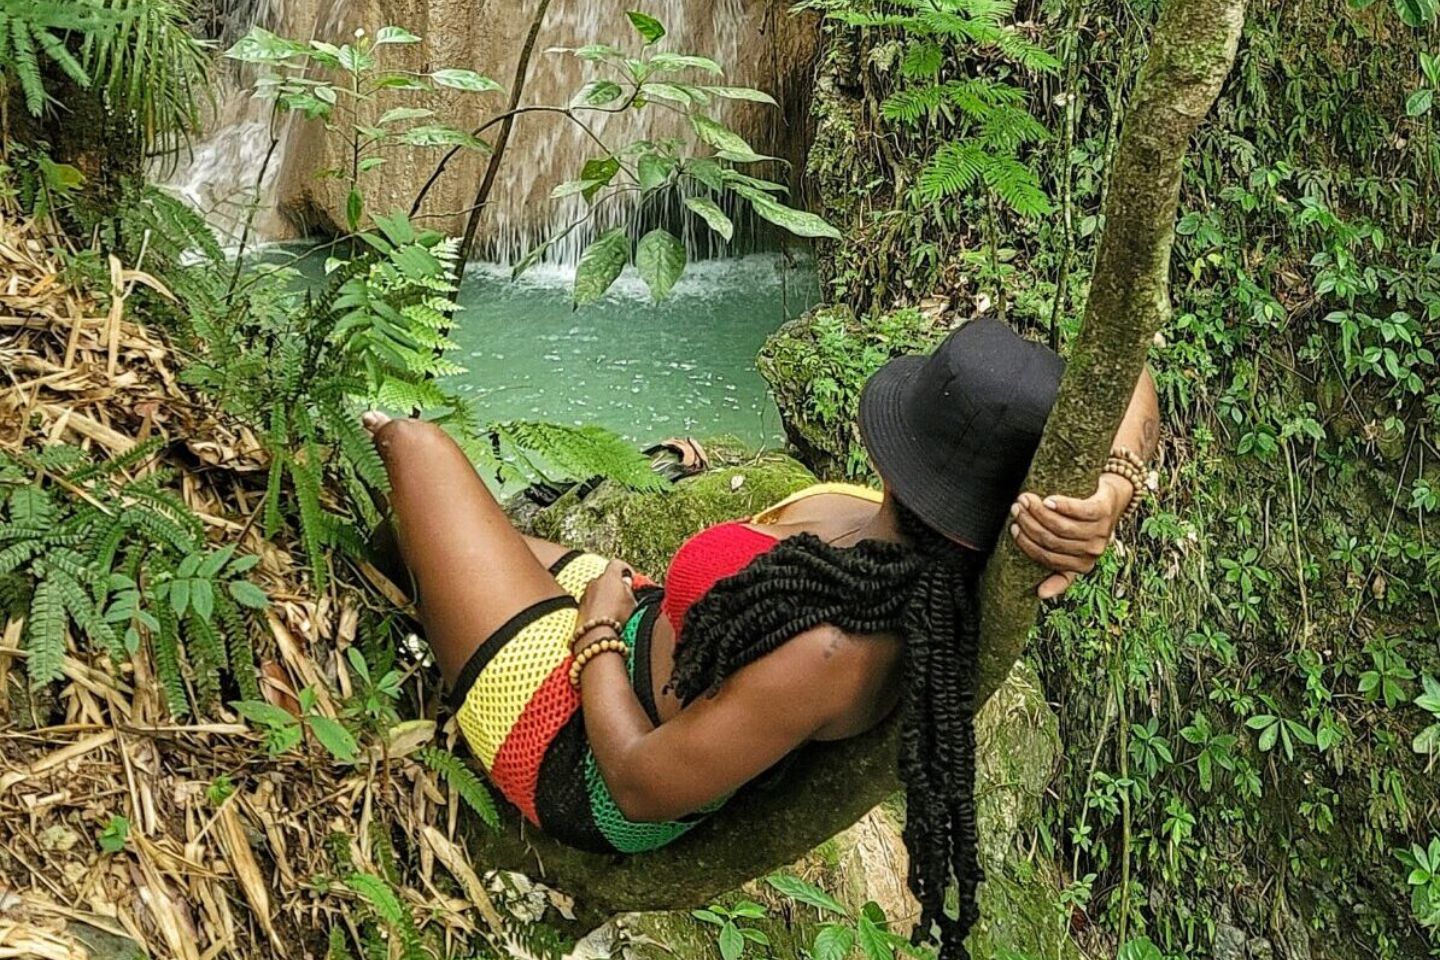 This Jamaican Traveler Visited Over 100 Waterfalls Across the Island